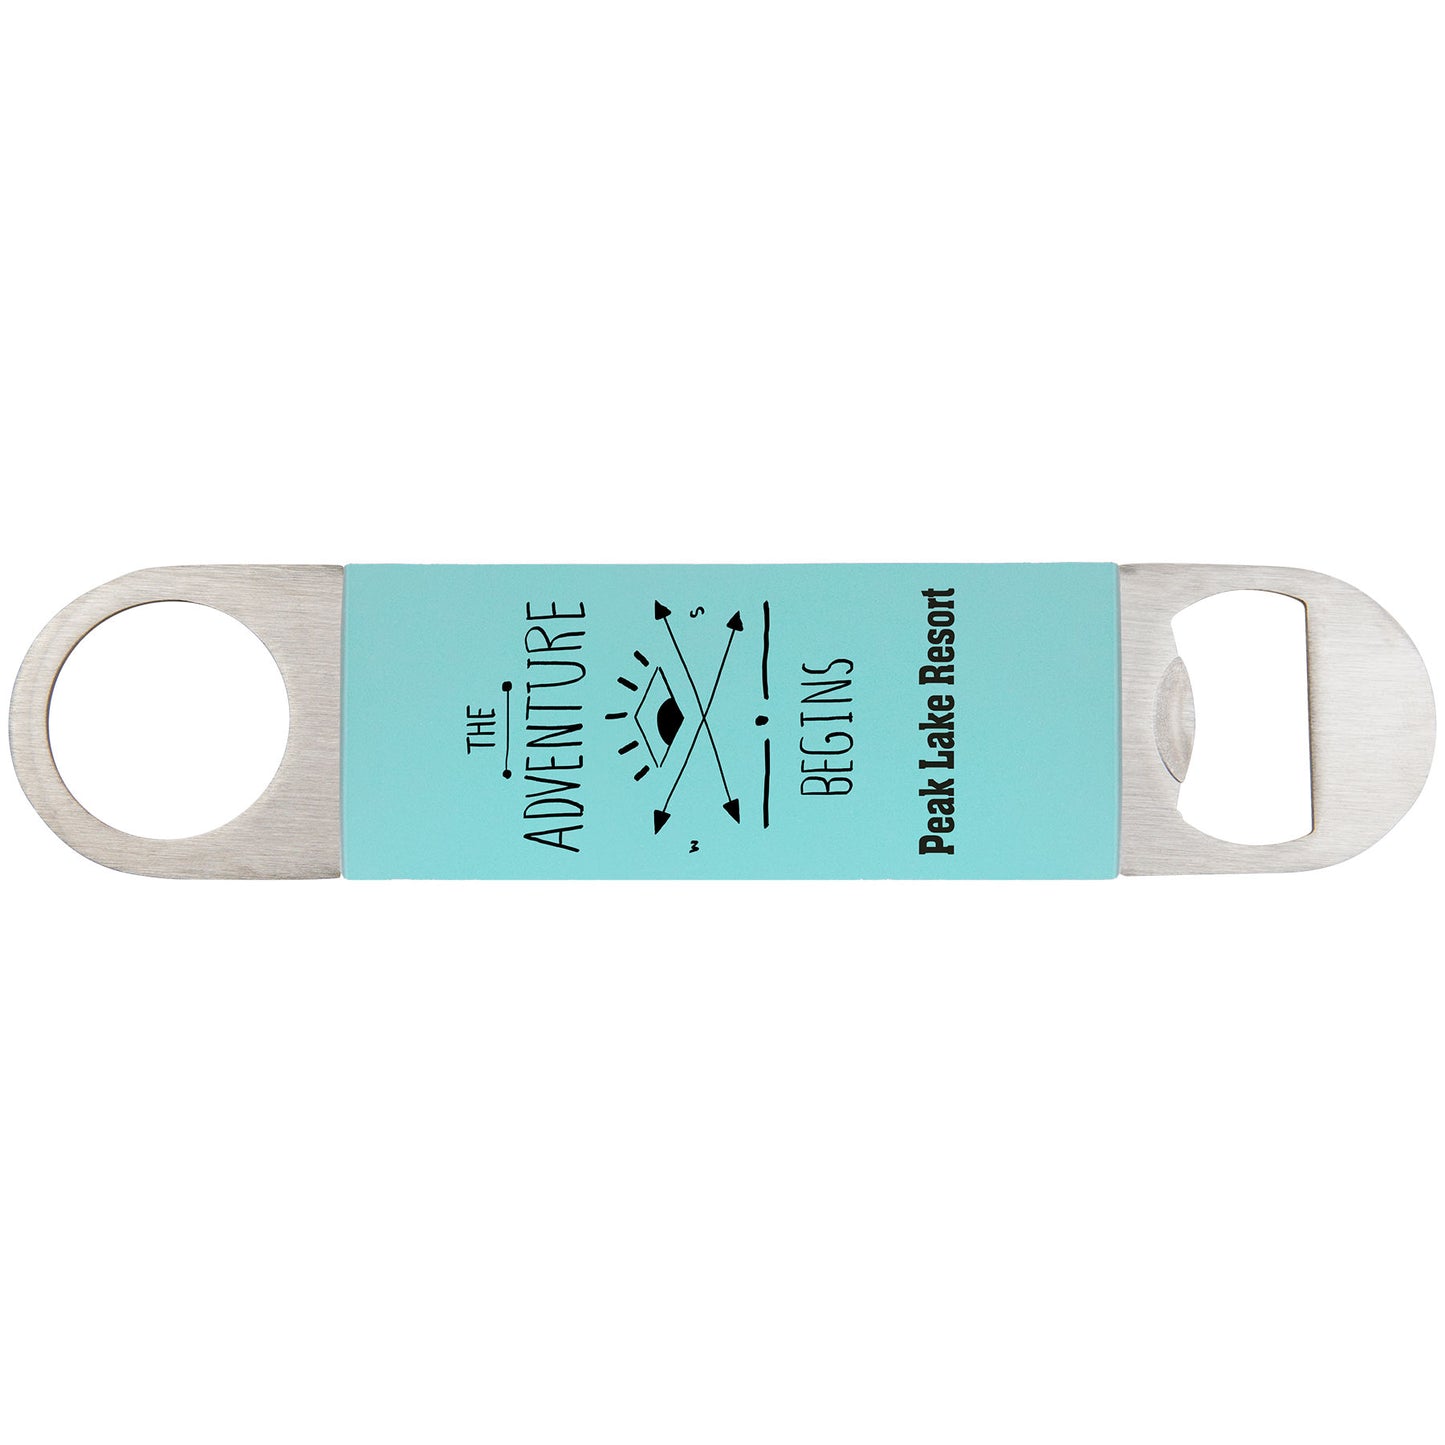 Bottle Opener with Silicone Grip - Personalized